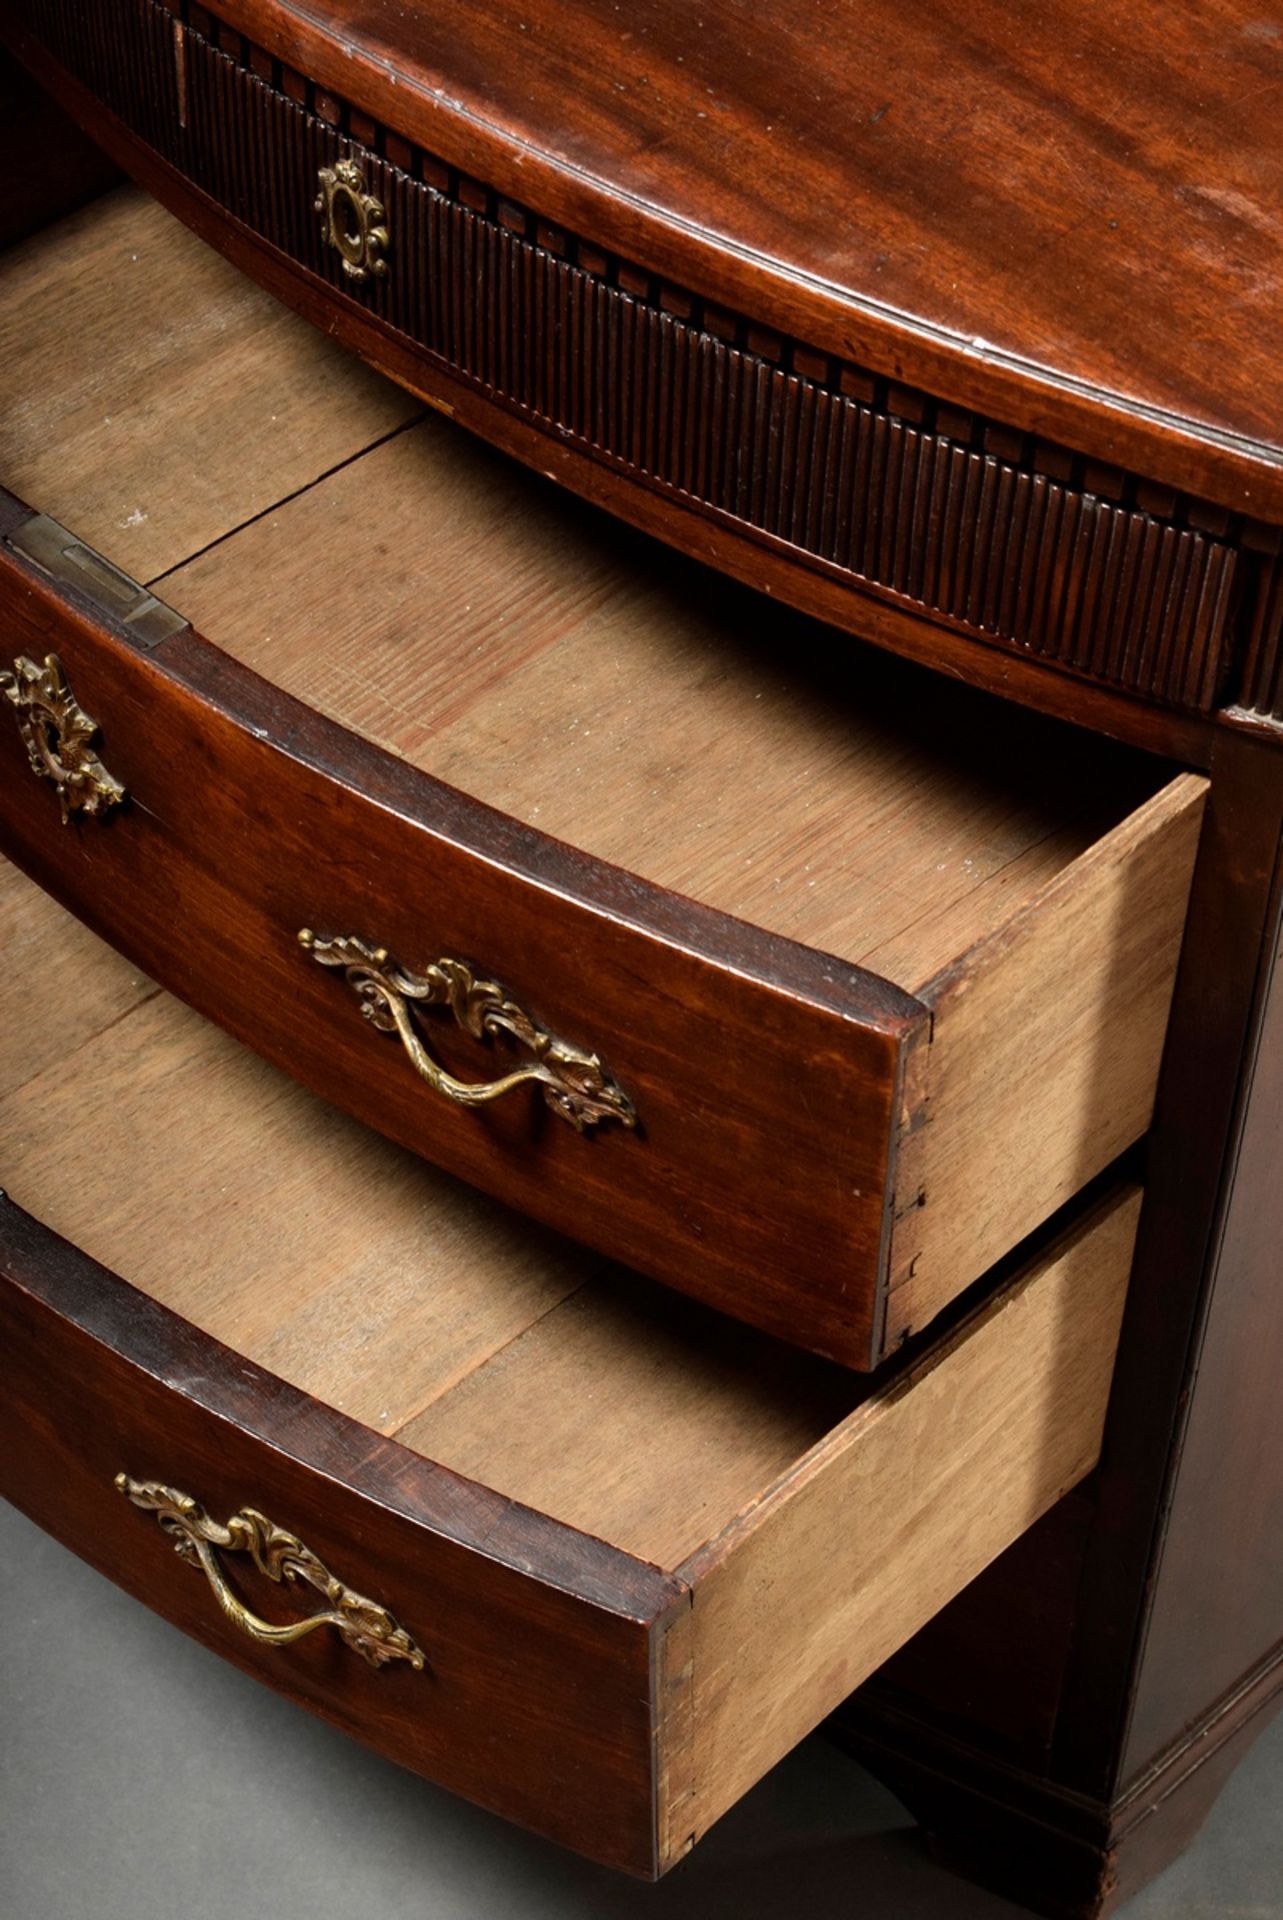 North German demilune chest of drawers with calf tooth and groove moulding, mahogany, c. 1780/1800, - Image 6 of 6